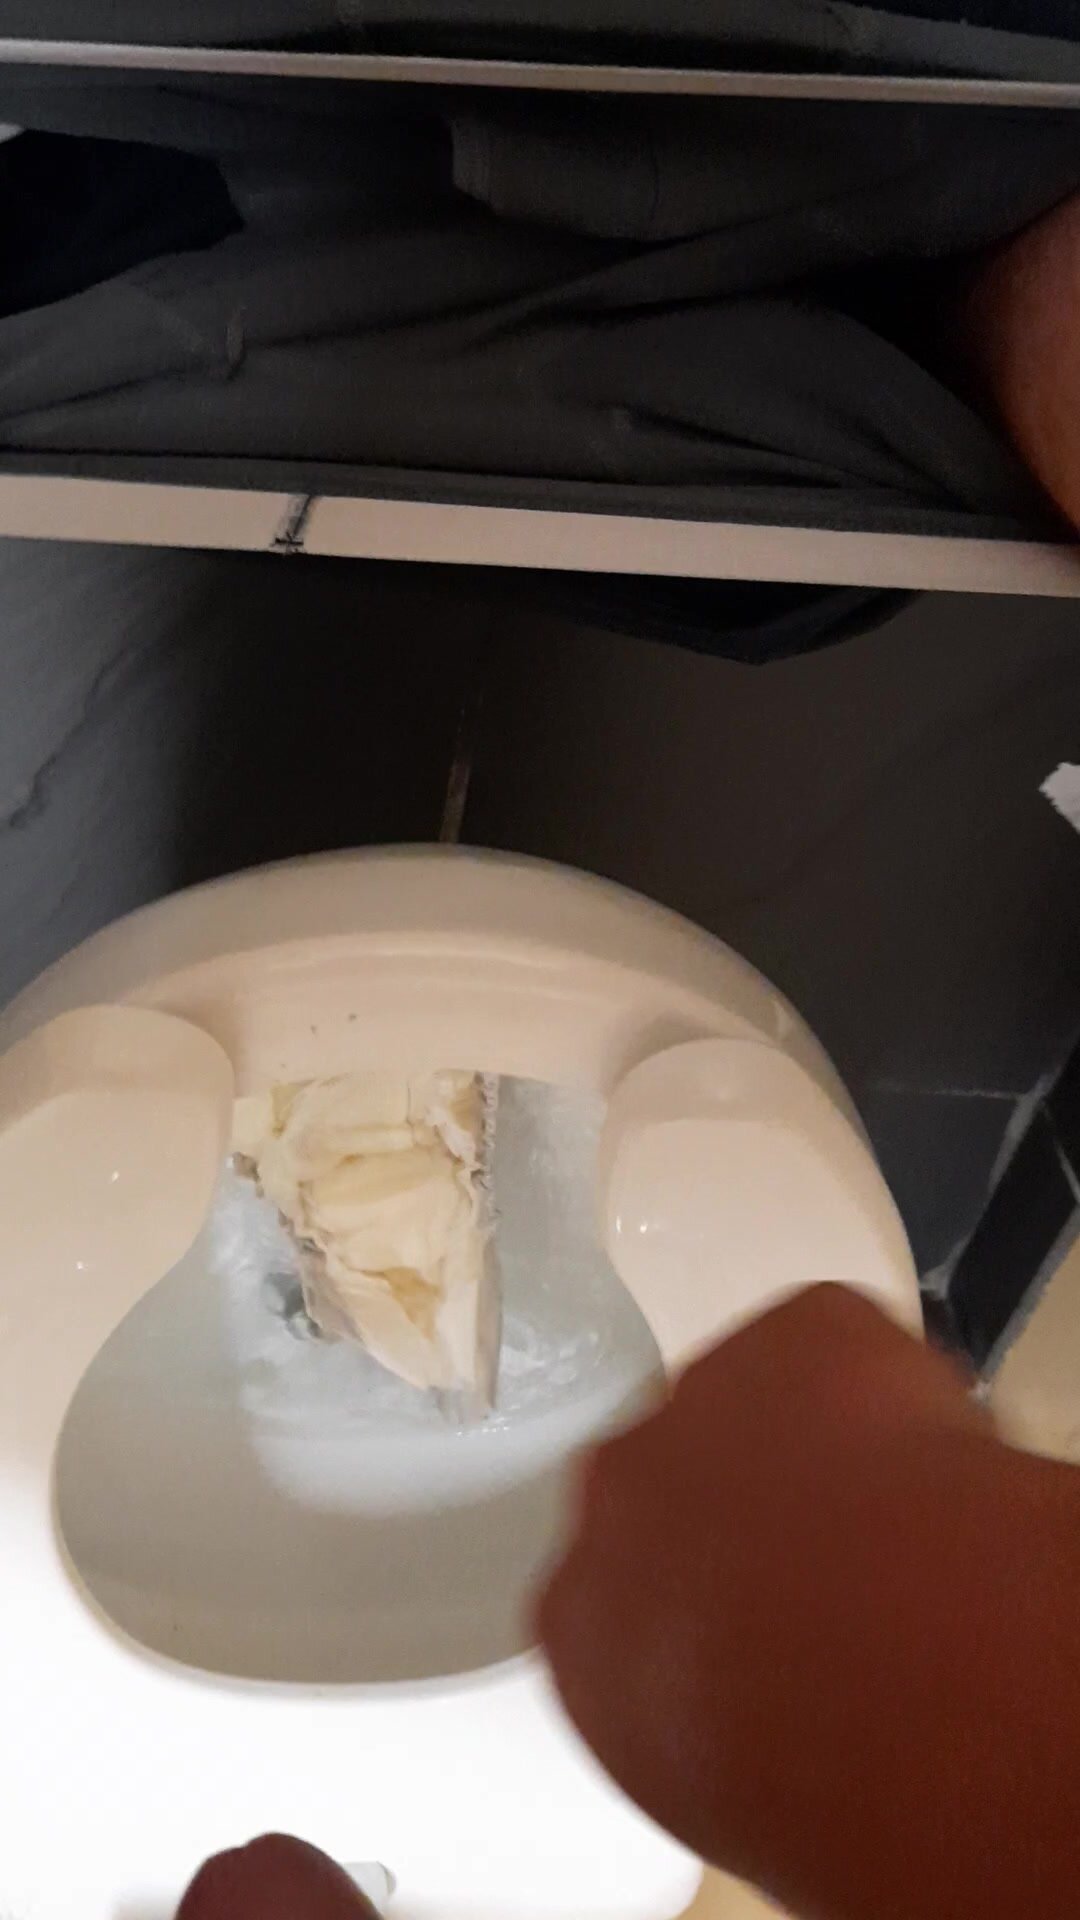 Getting rid of piss pad and shitting